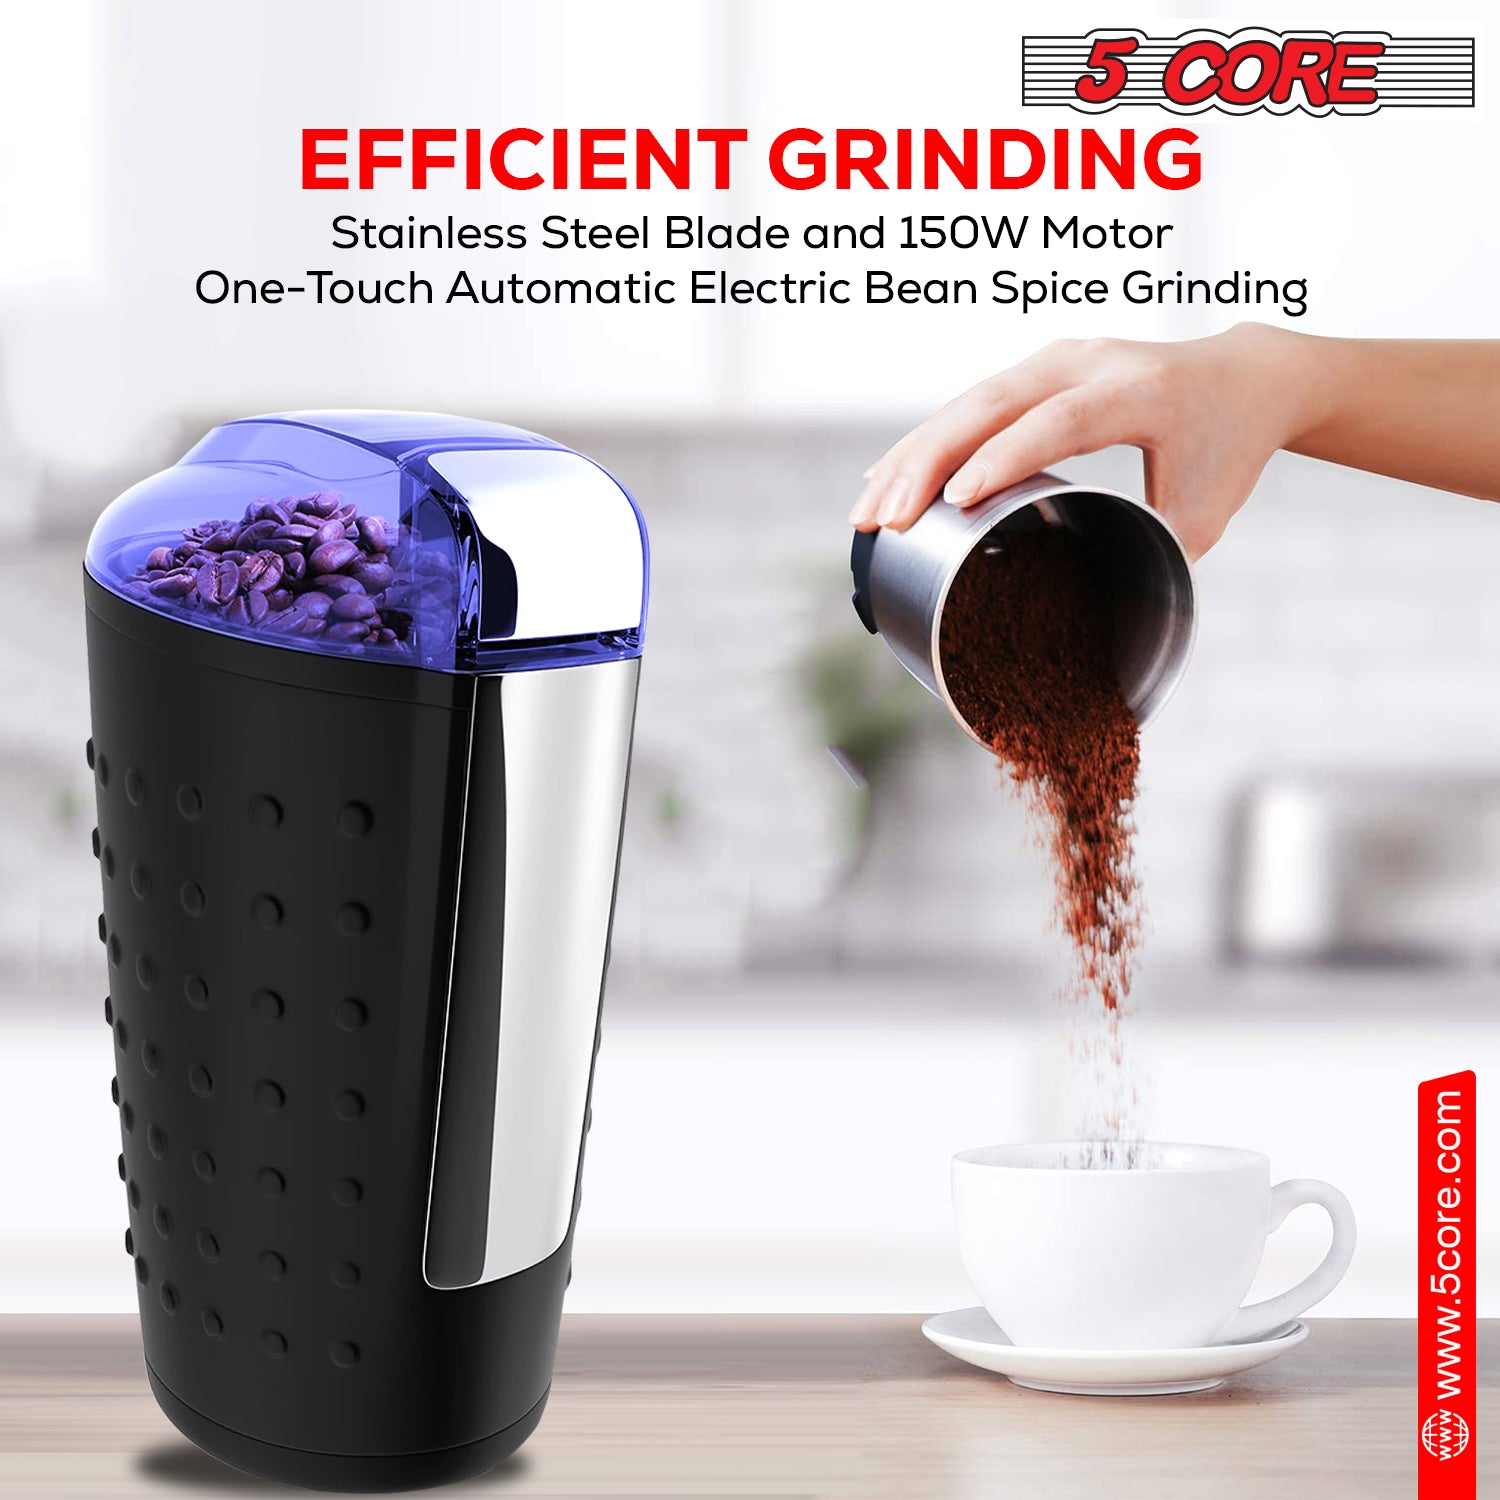 Upgrade your coffee routine with the powerful 150W electric bean grinder.